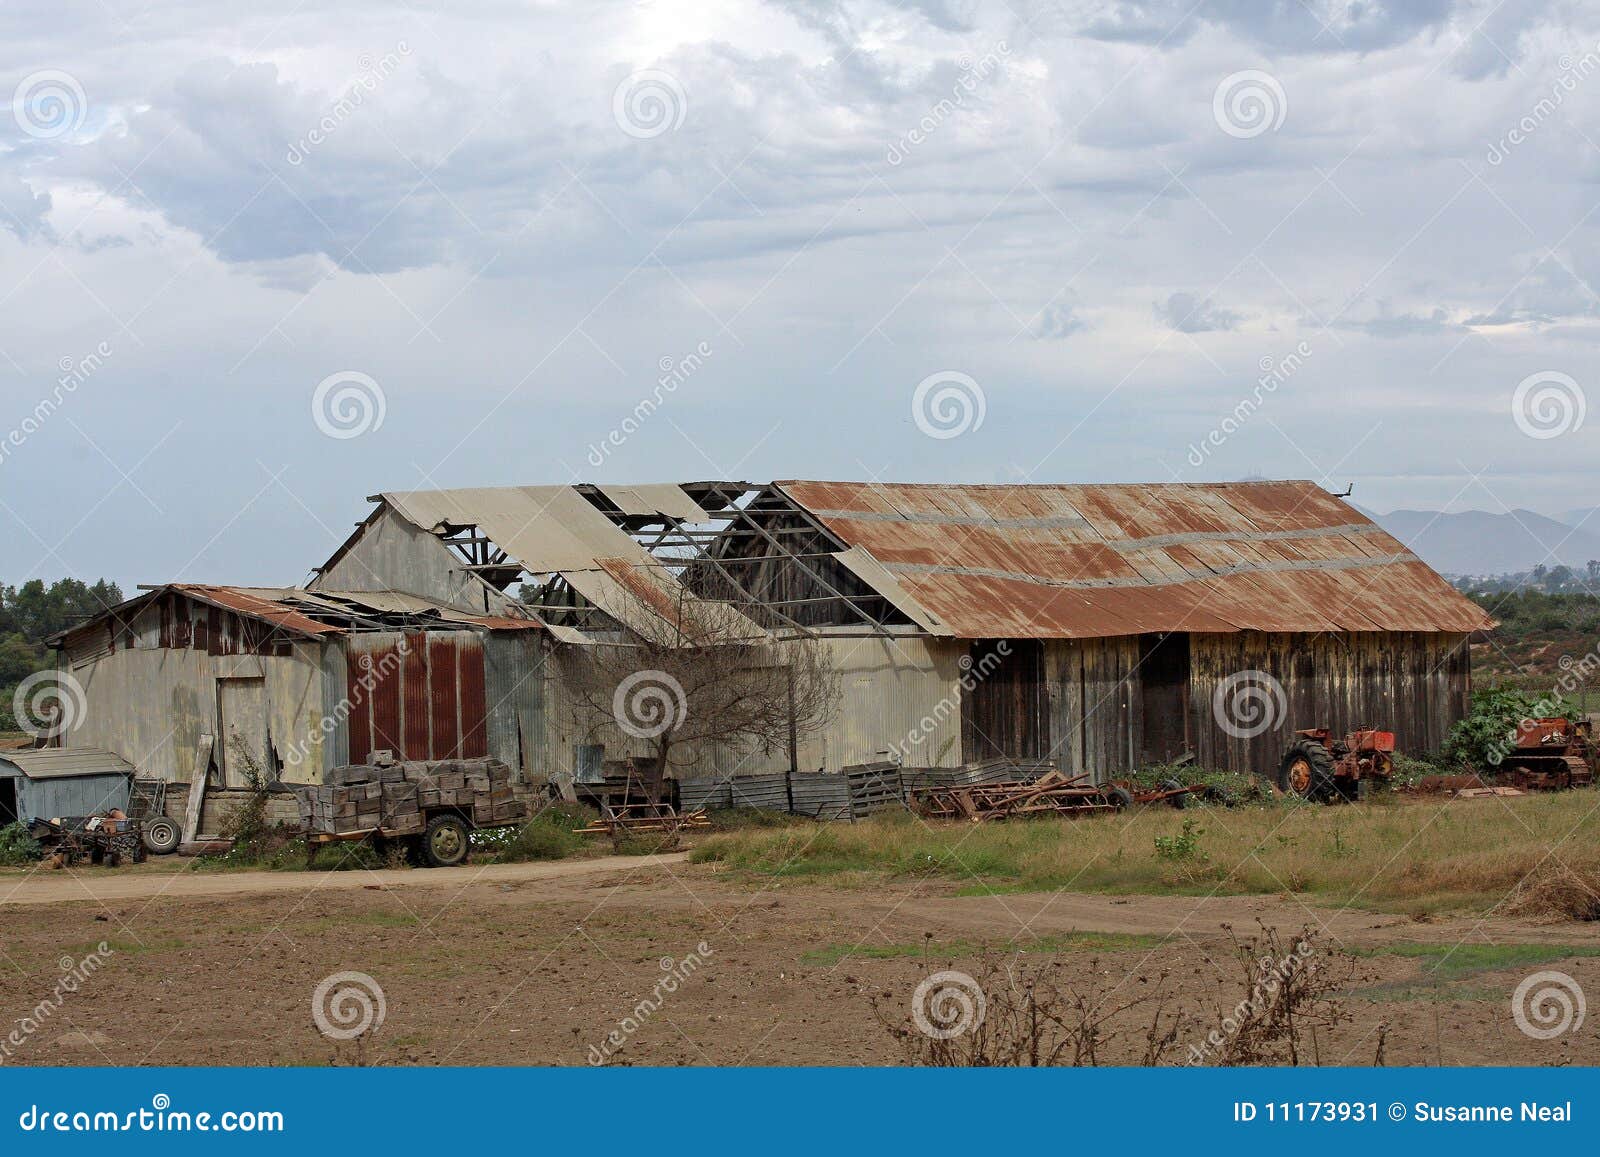 Dilapidated metal barn stock image. Image of clouds, equipment - 11173931